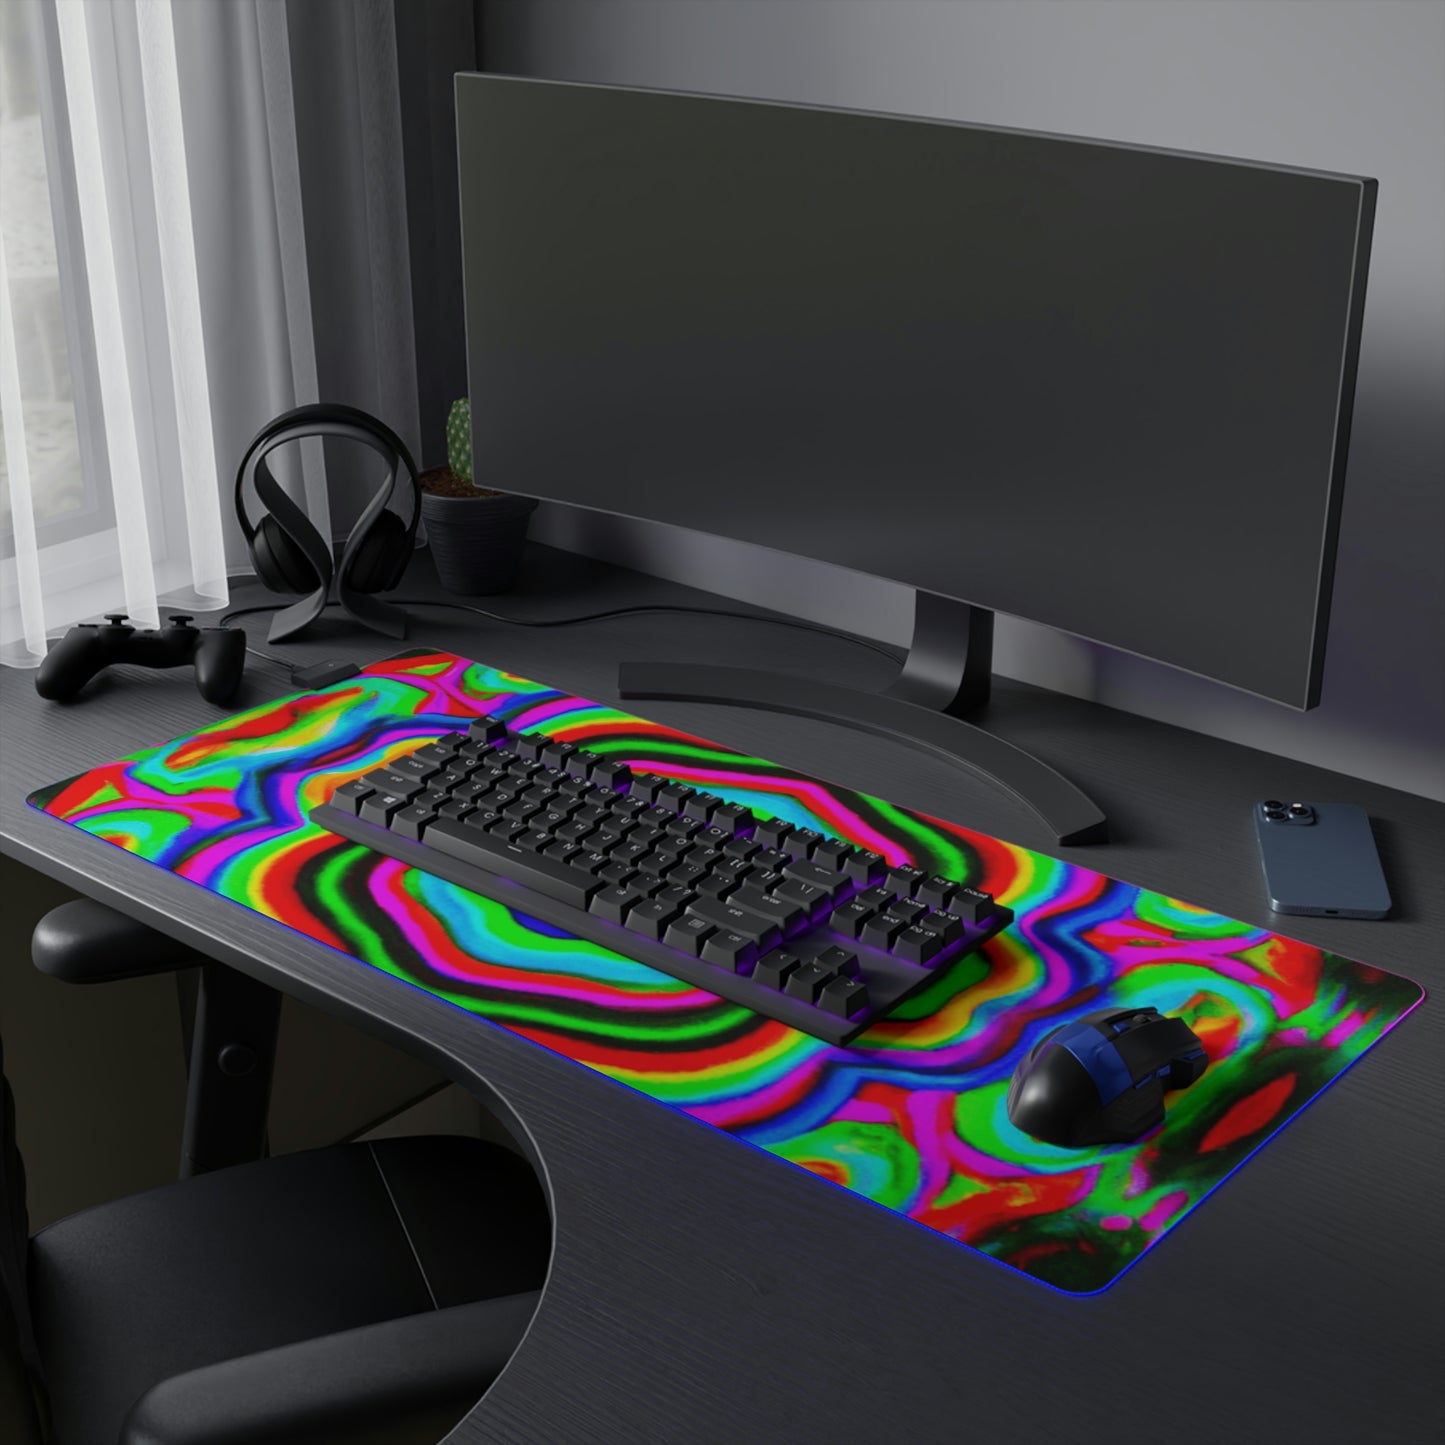 Jimmy "The Rocketman" Sparks - Psychedelic Trippy LED Light Up Gaming Mouse Pad